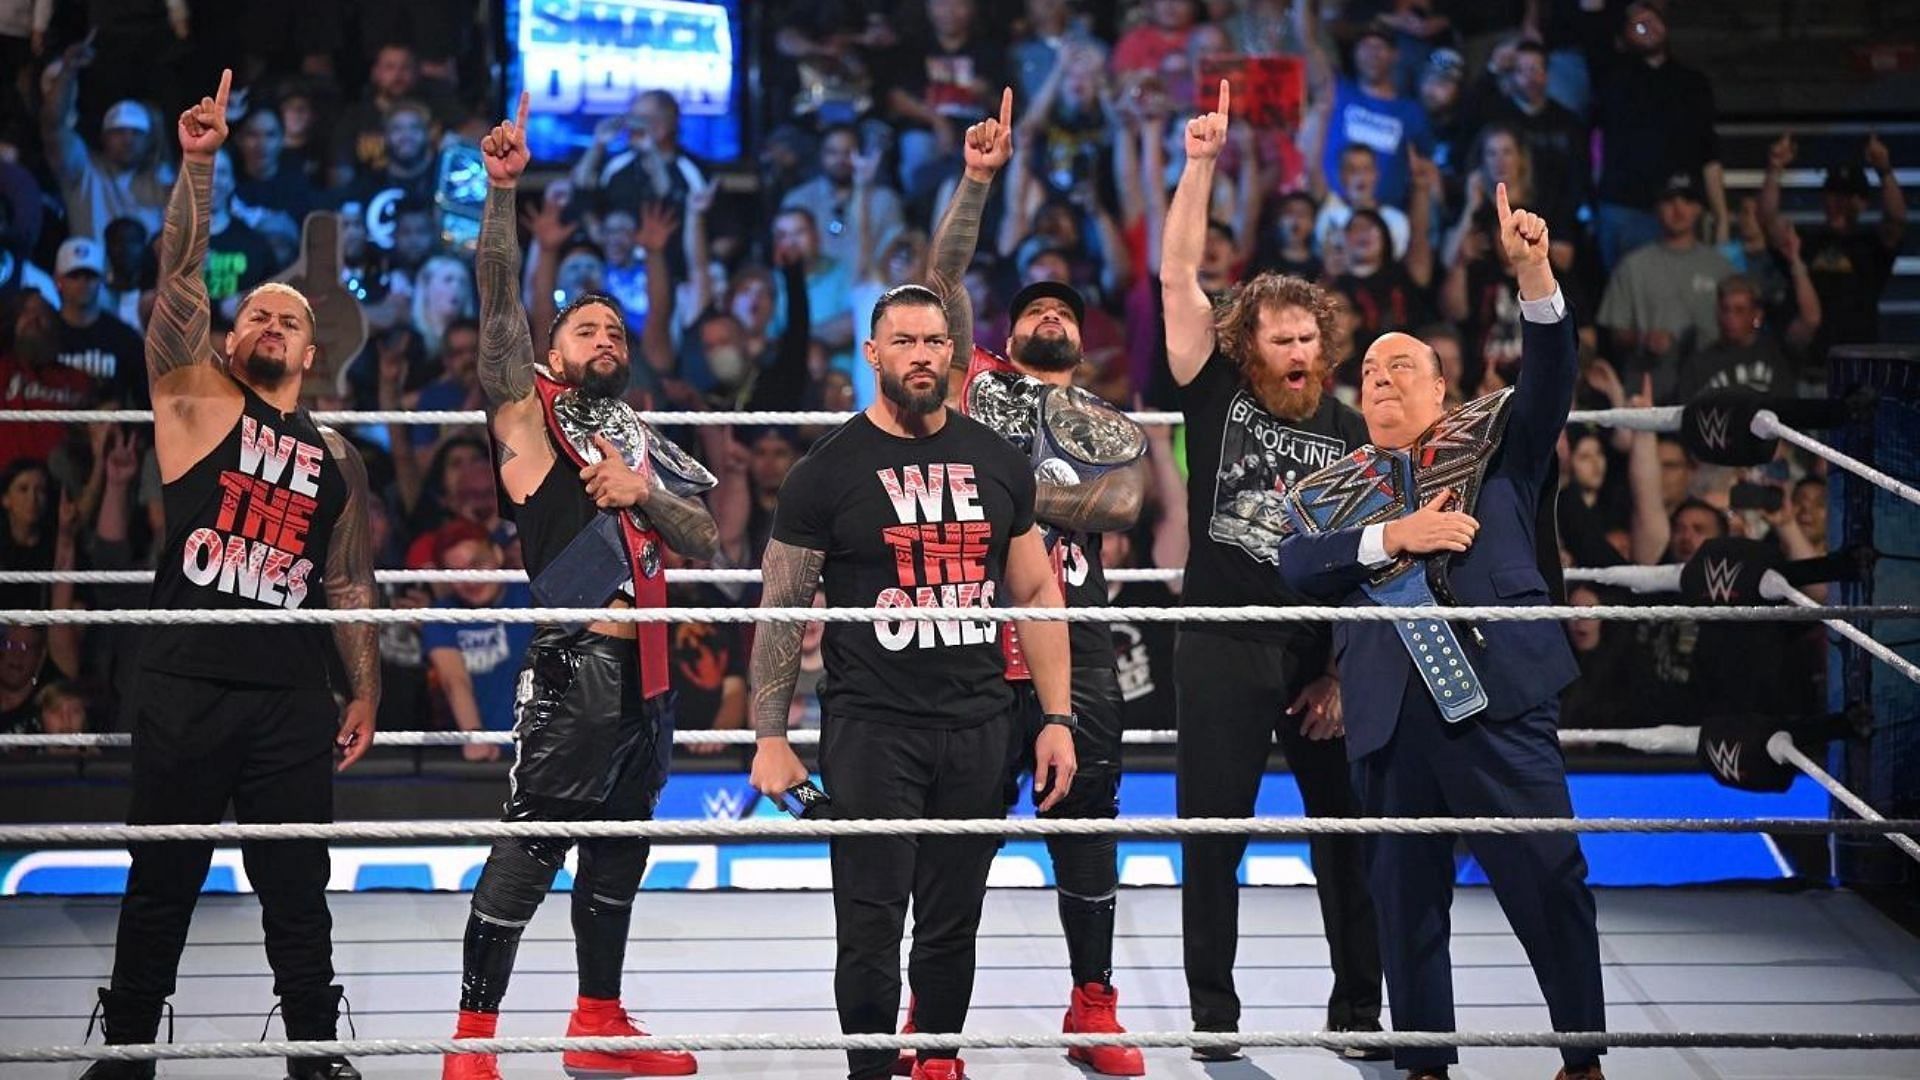 The Bloodline will be in action at Survivor Series